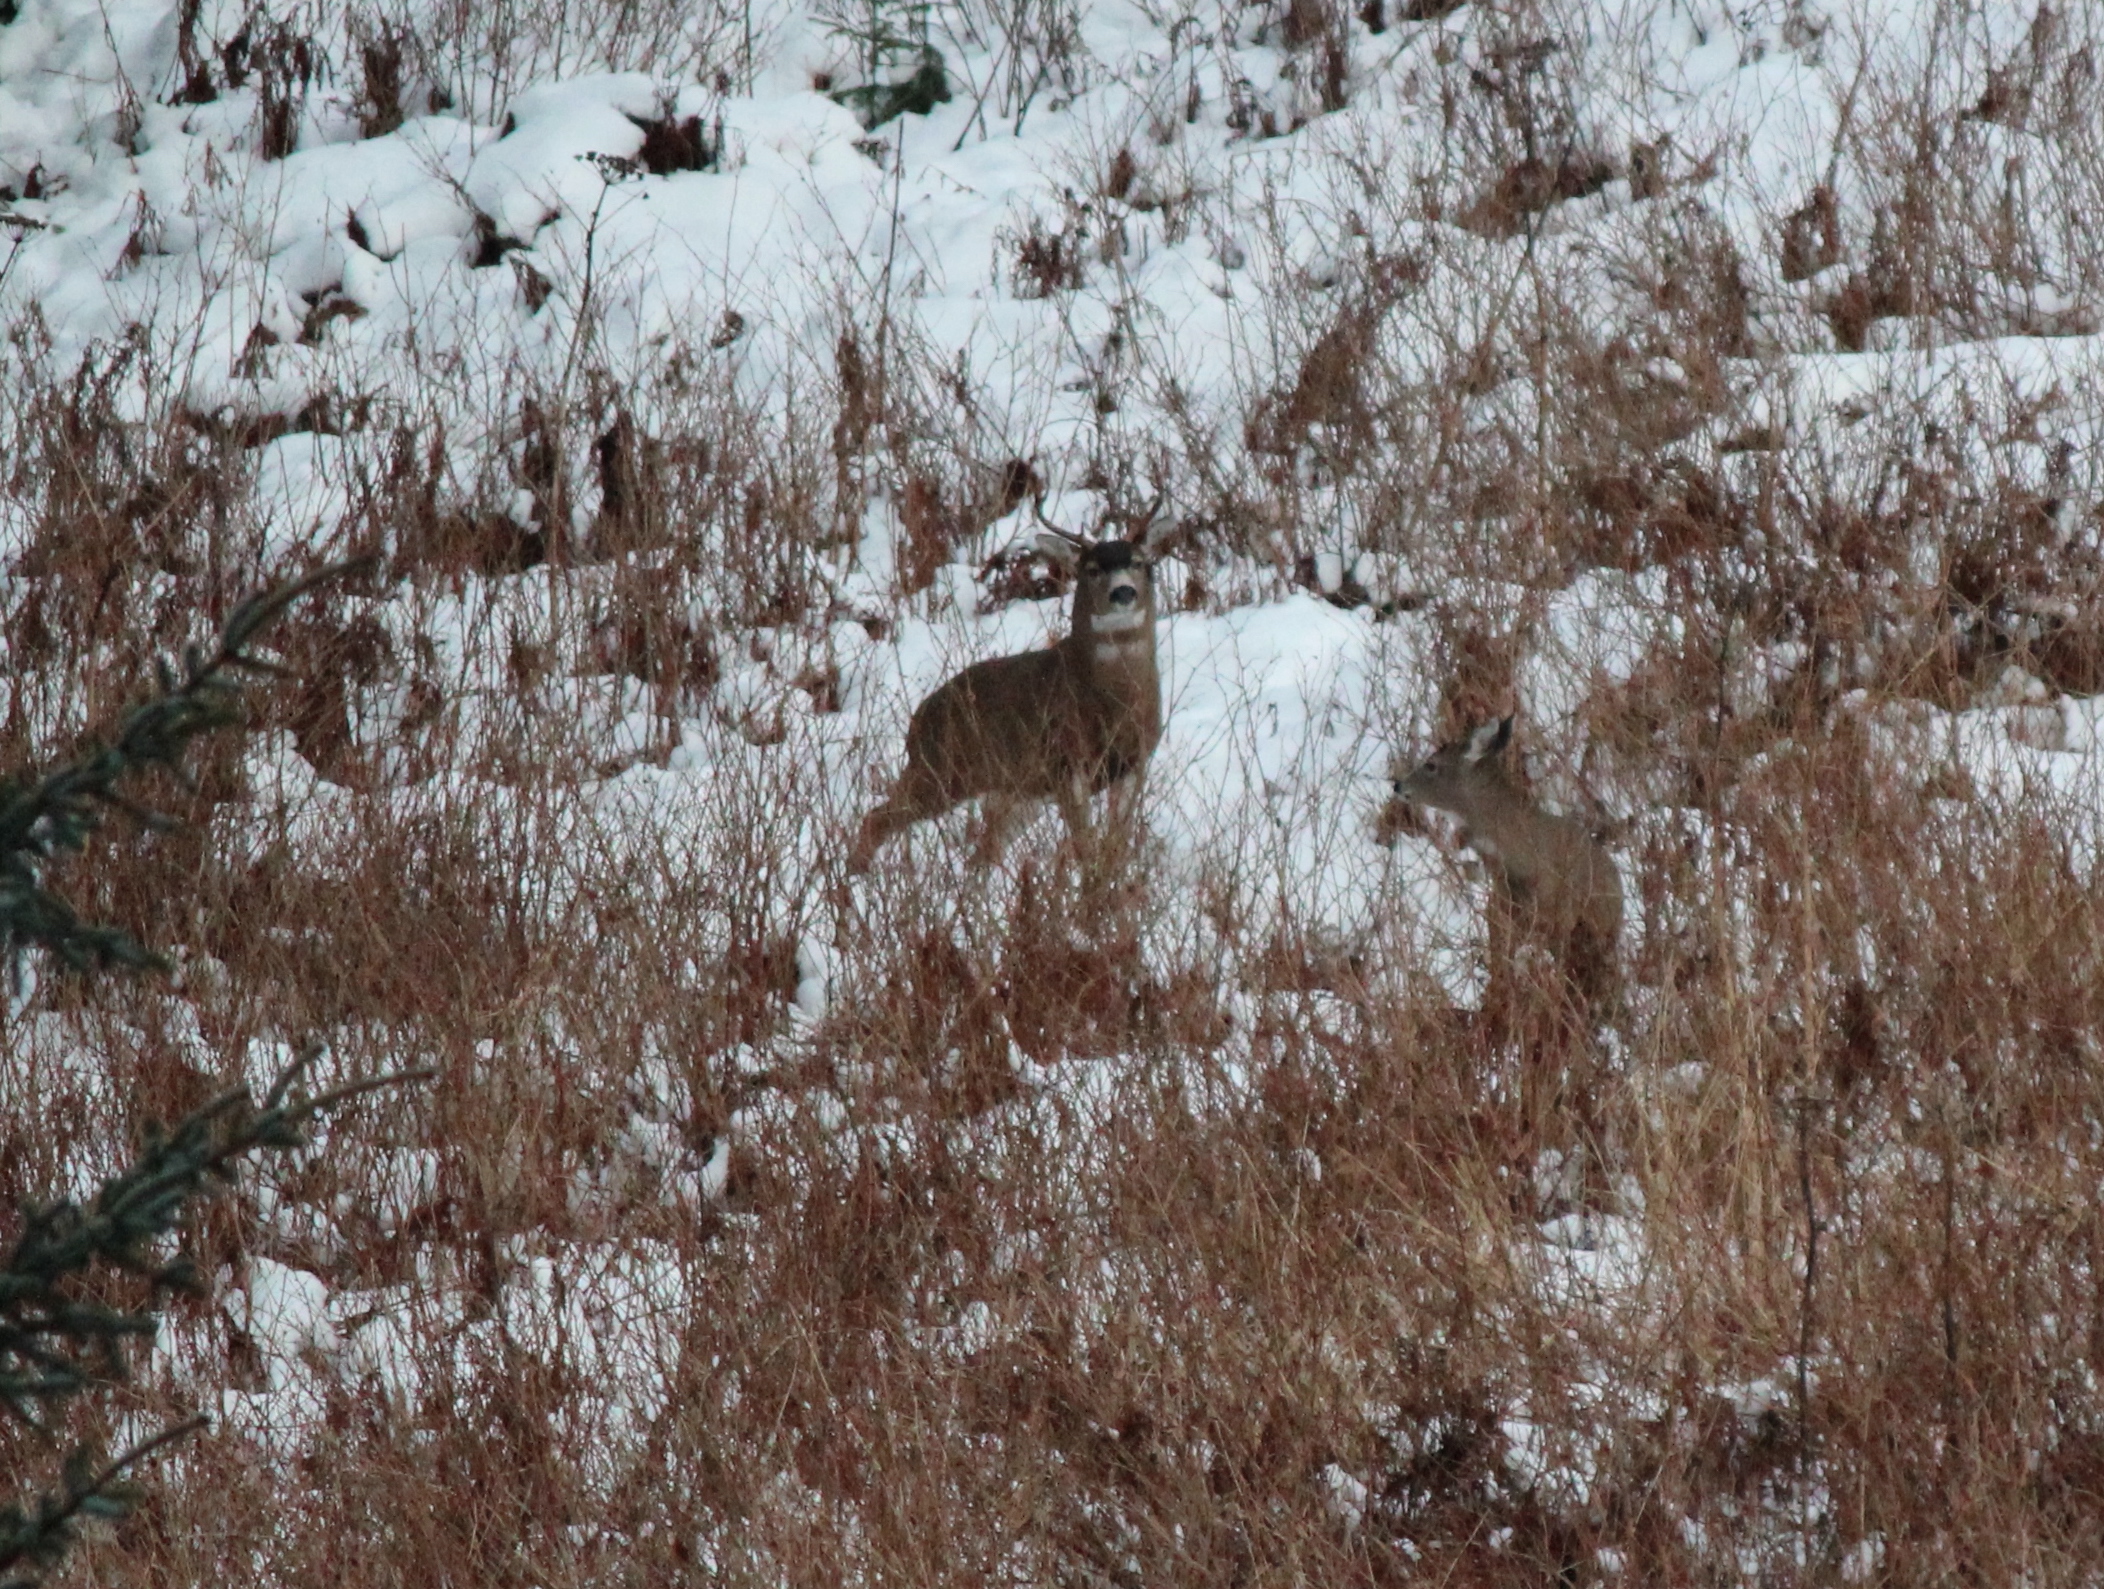 sitka blacktail deer obscured by thin brush